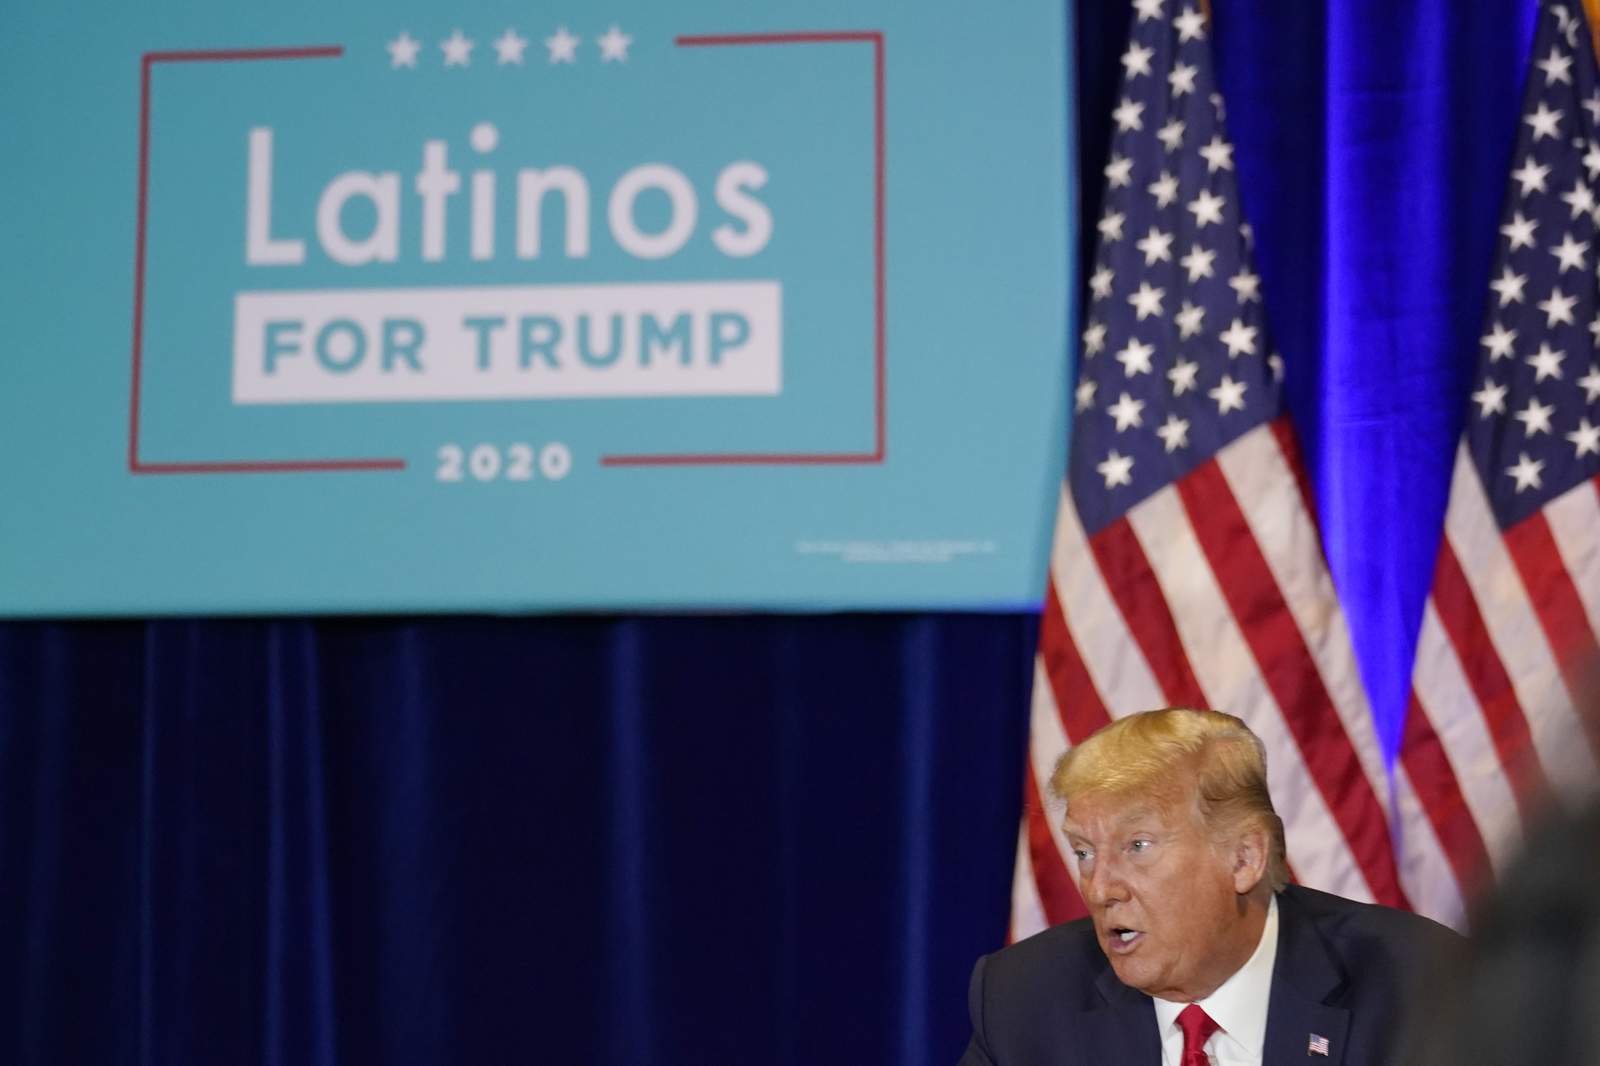 On Western swing, Trump aims to court pivotal Latino voters